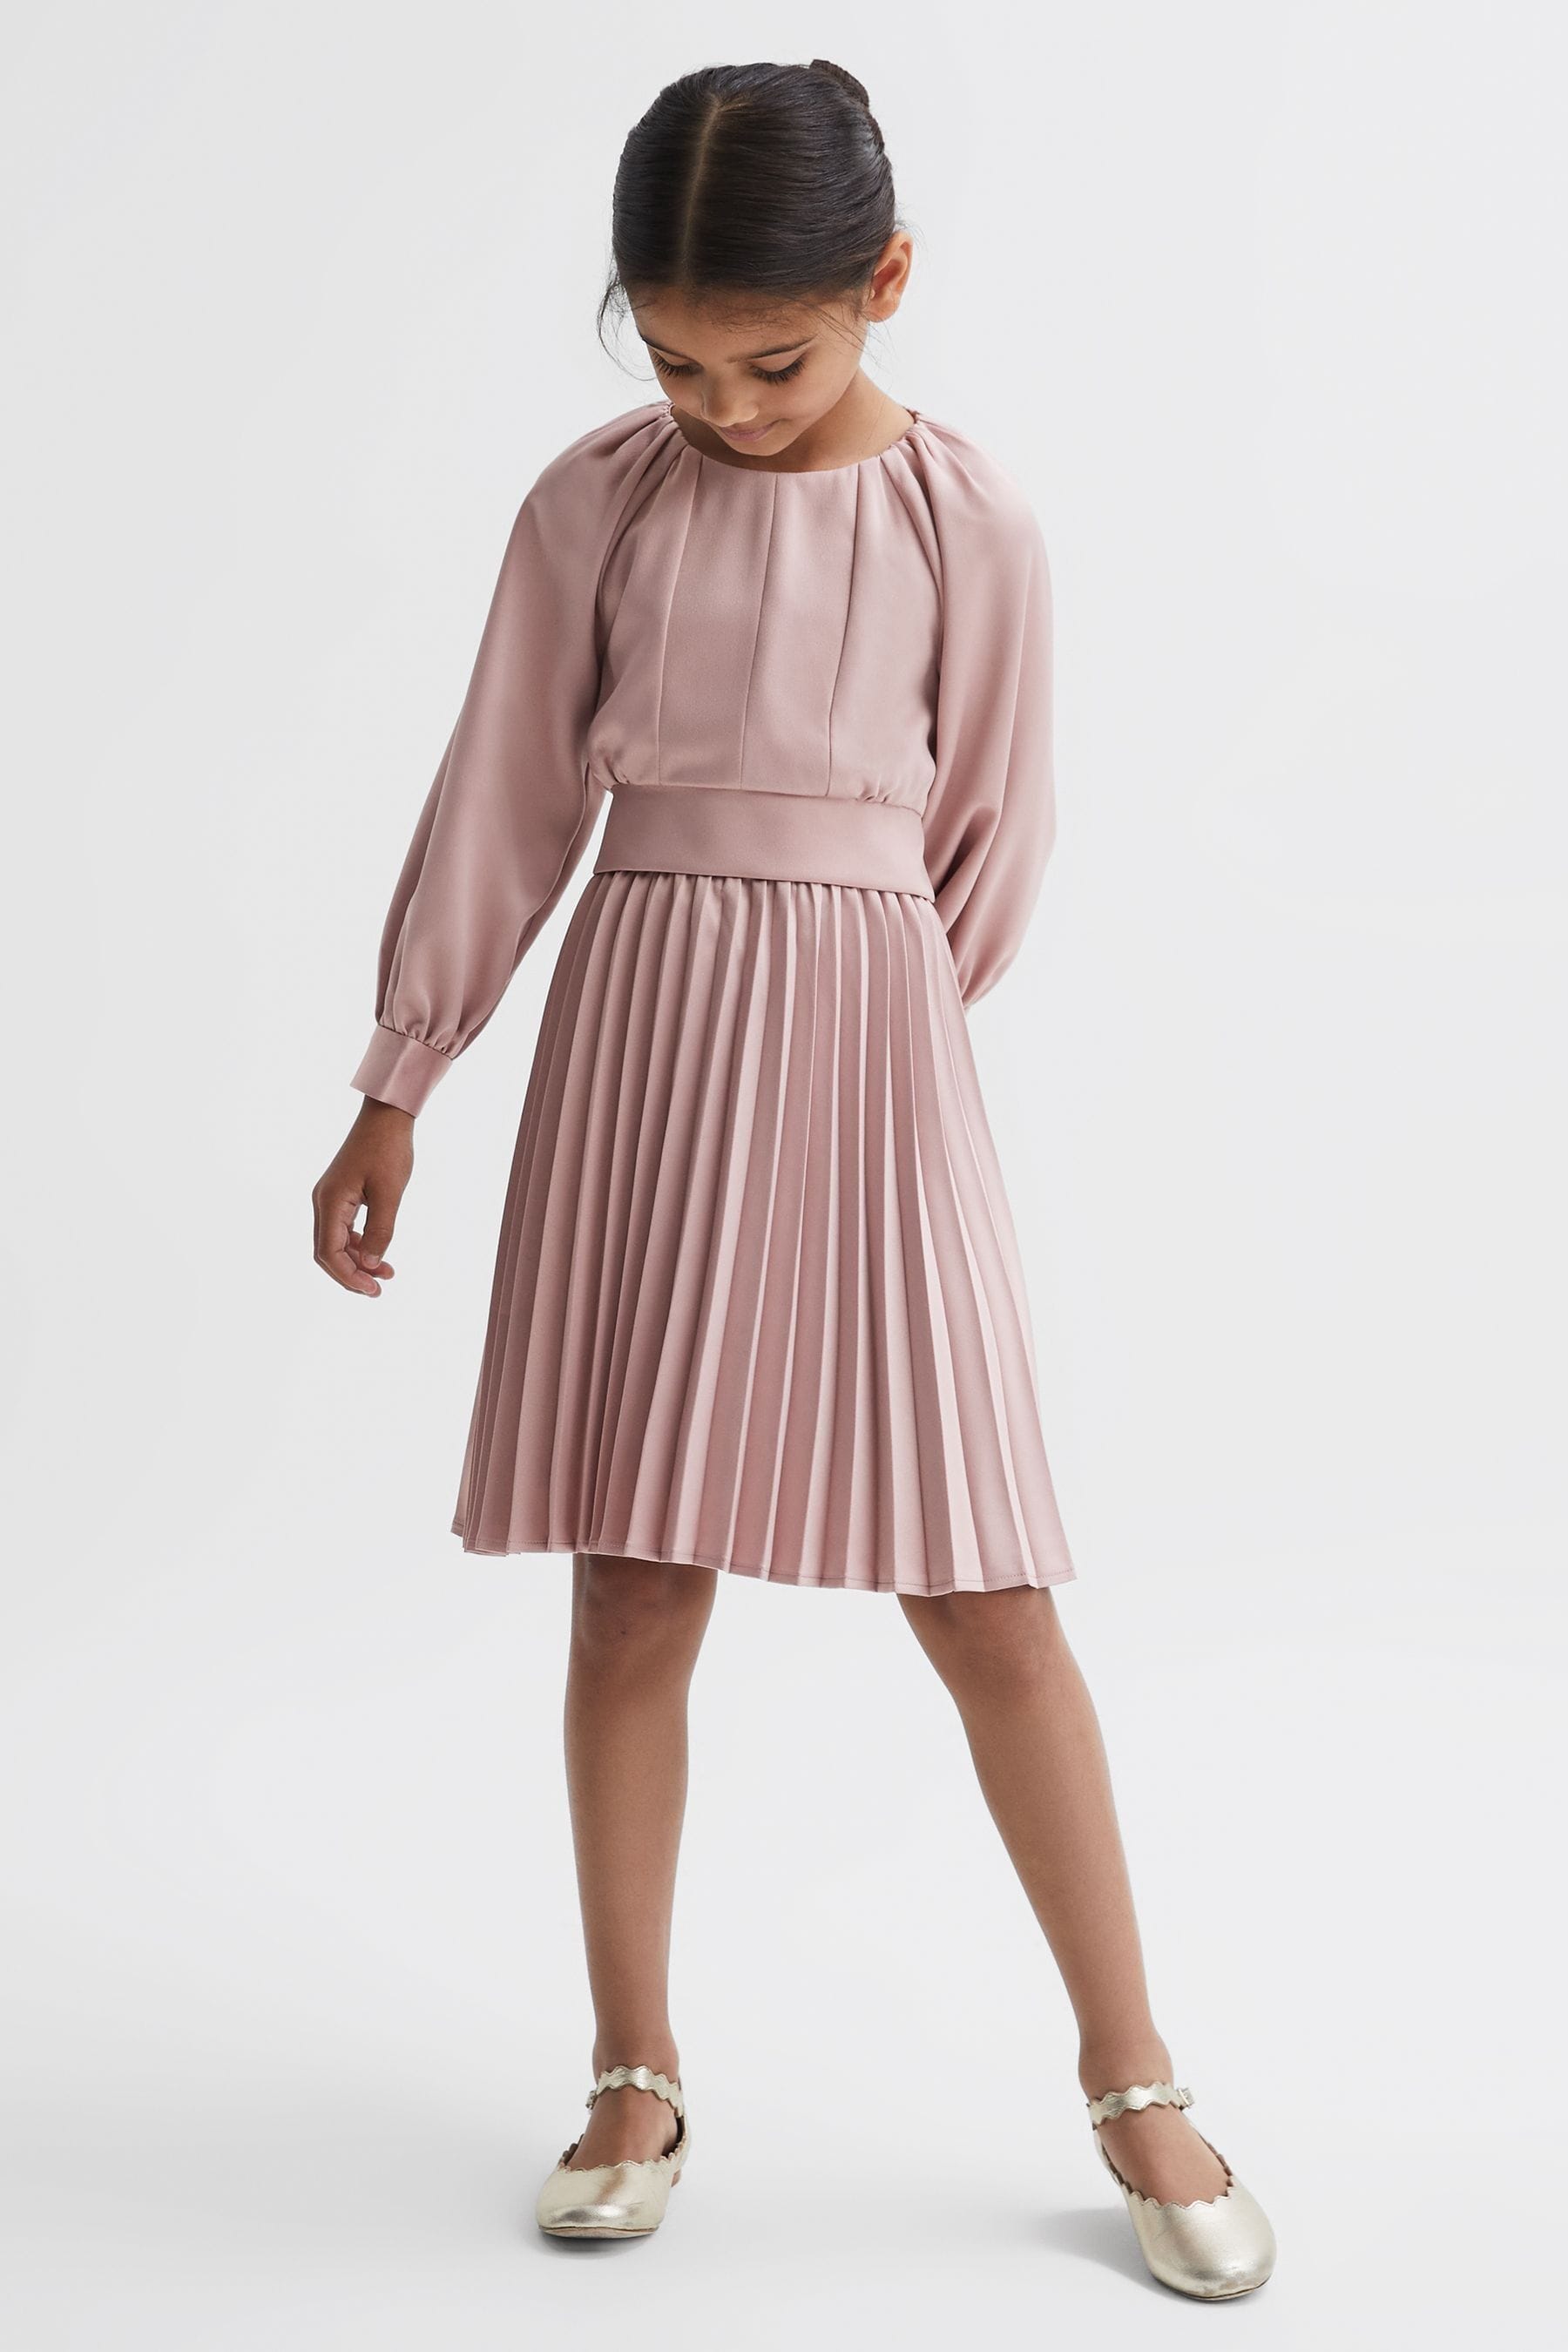 Reiss Kids' Molly - Pink Junior Cropped Pleated Blouse, Age 8-9 Years